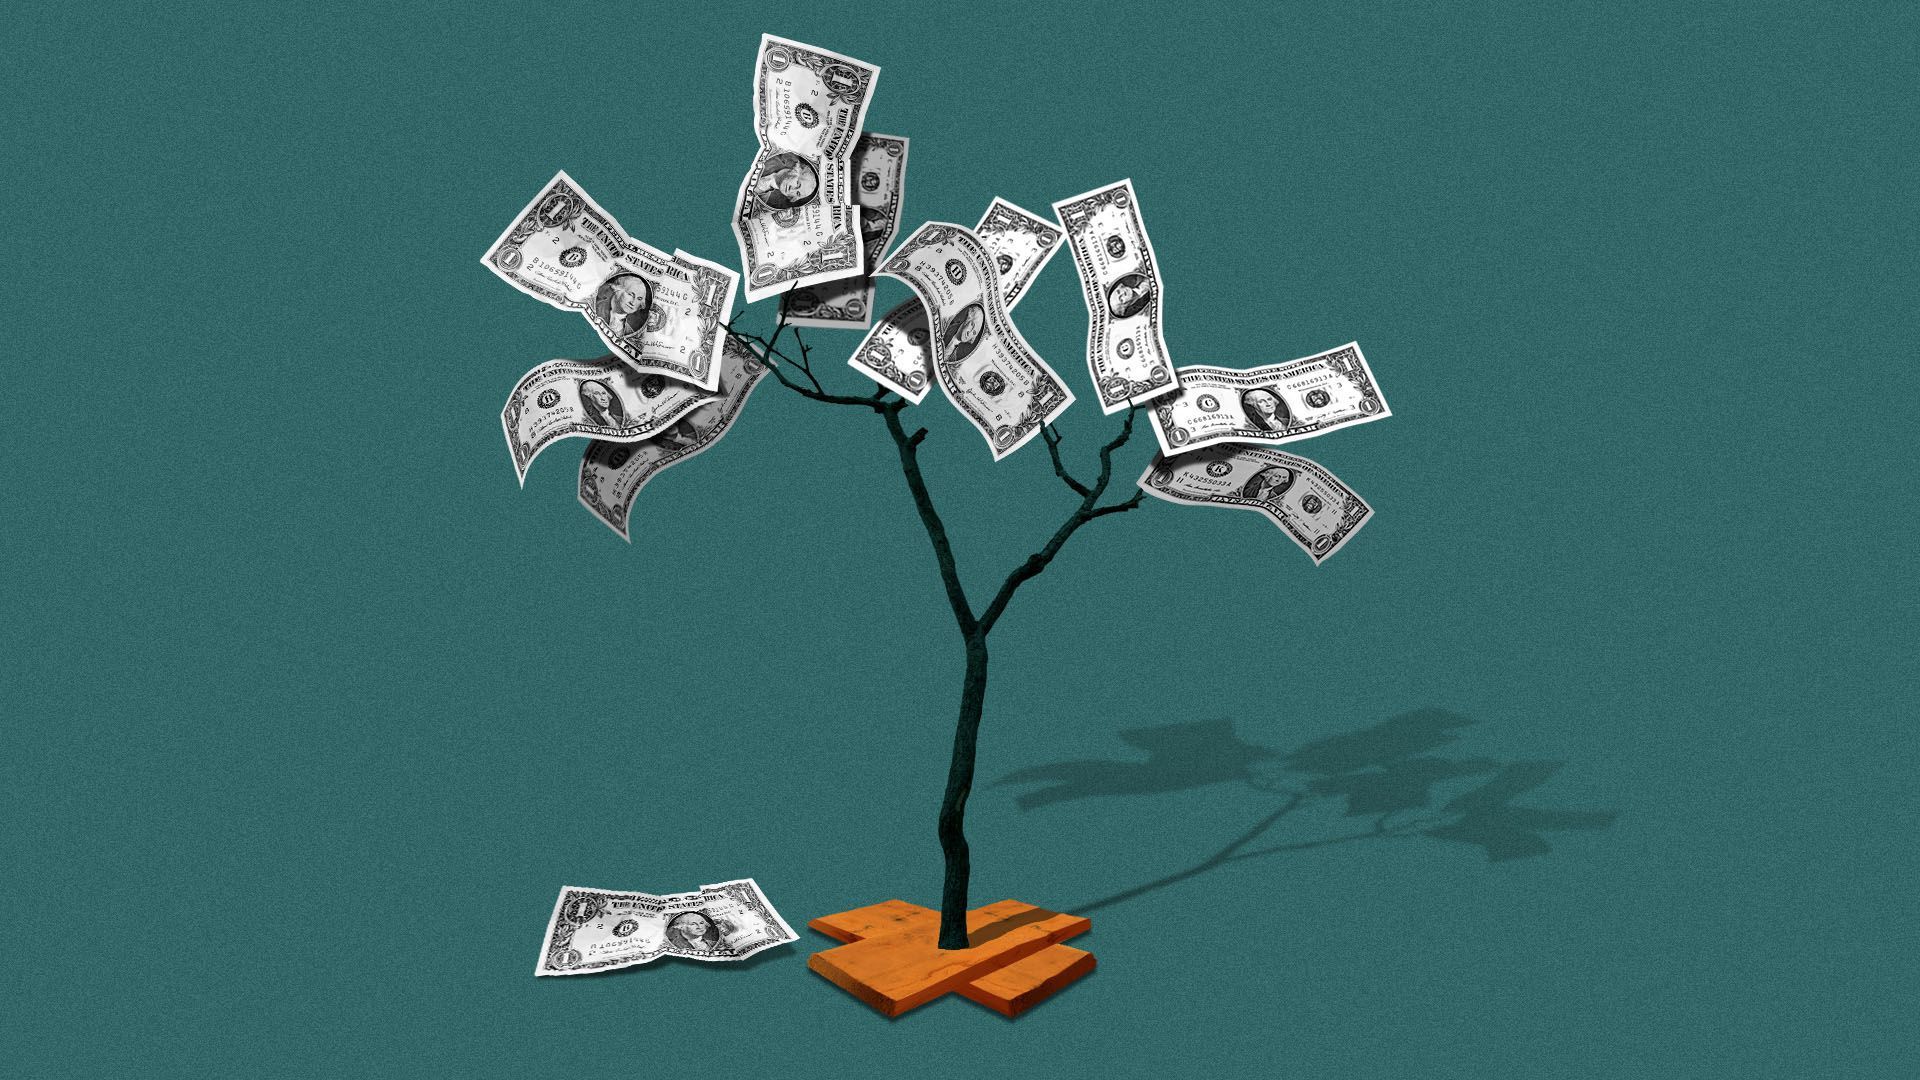 Illustration of a tree with dollars growing off of it.